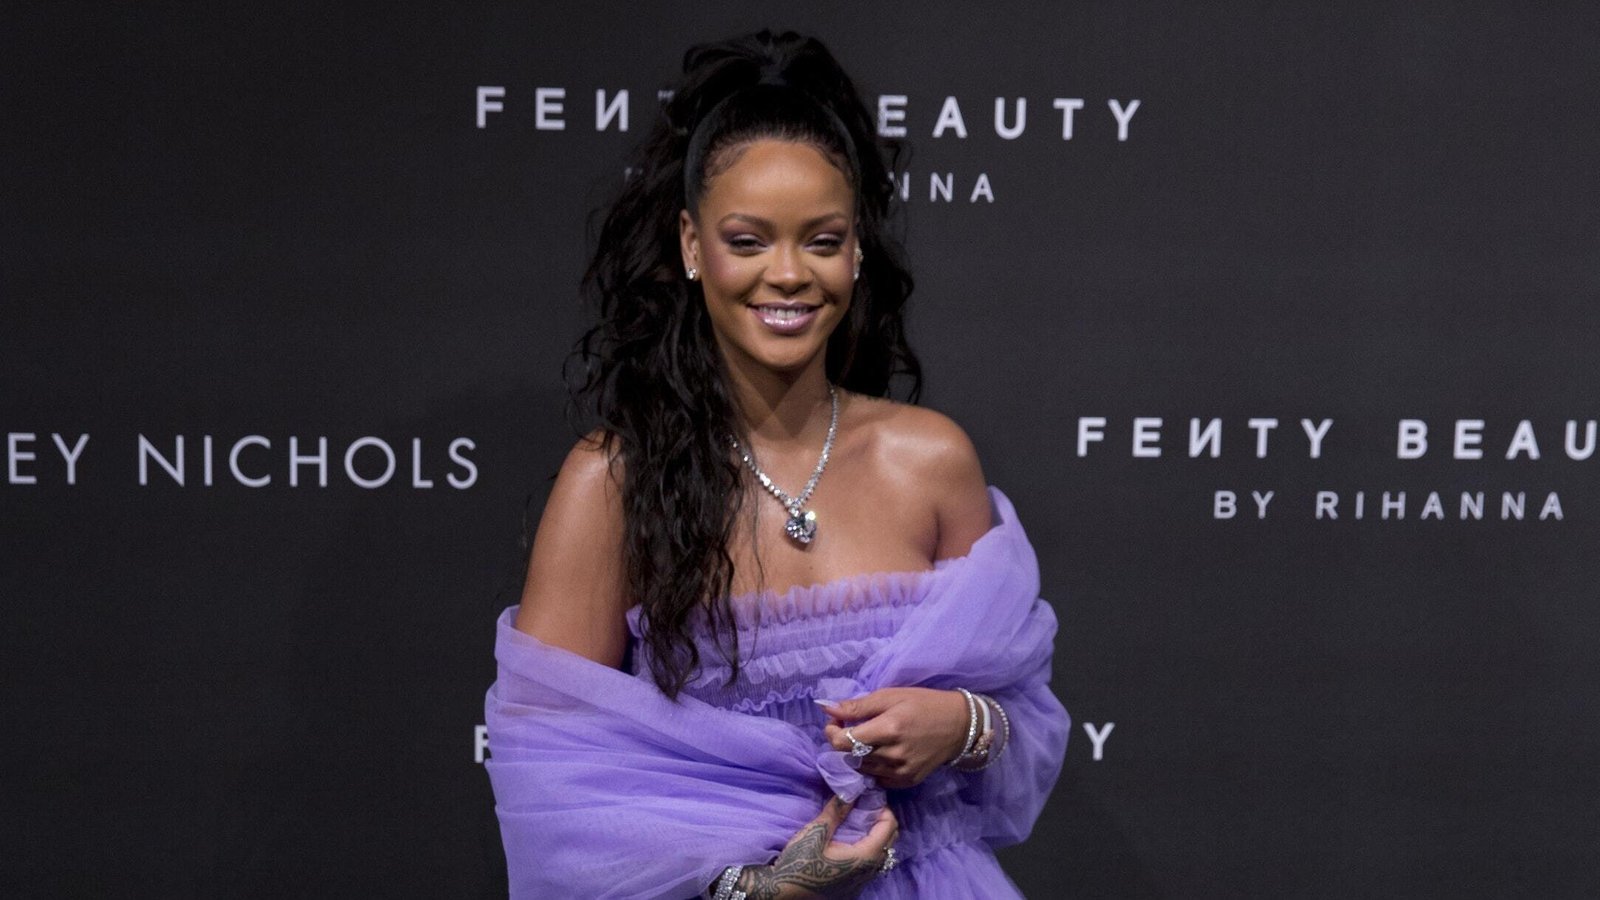 Here's What We Know About Rihanna's New Fashion Line, Which Just